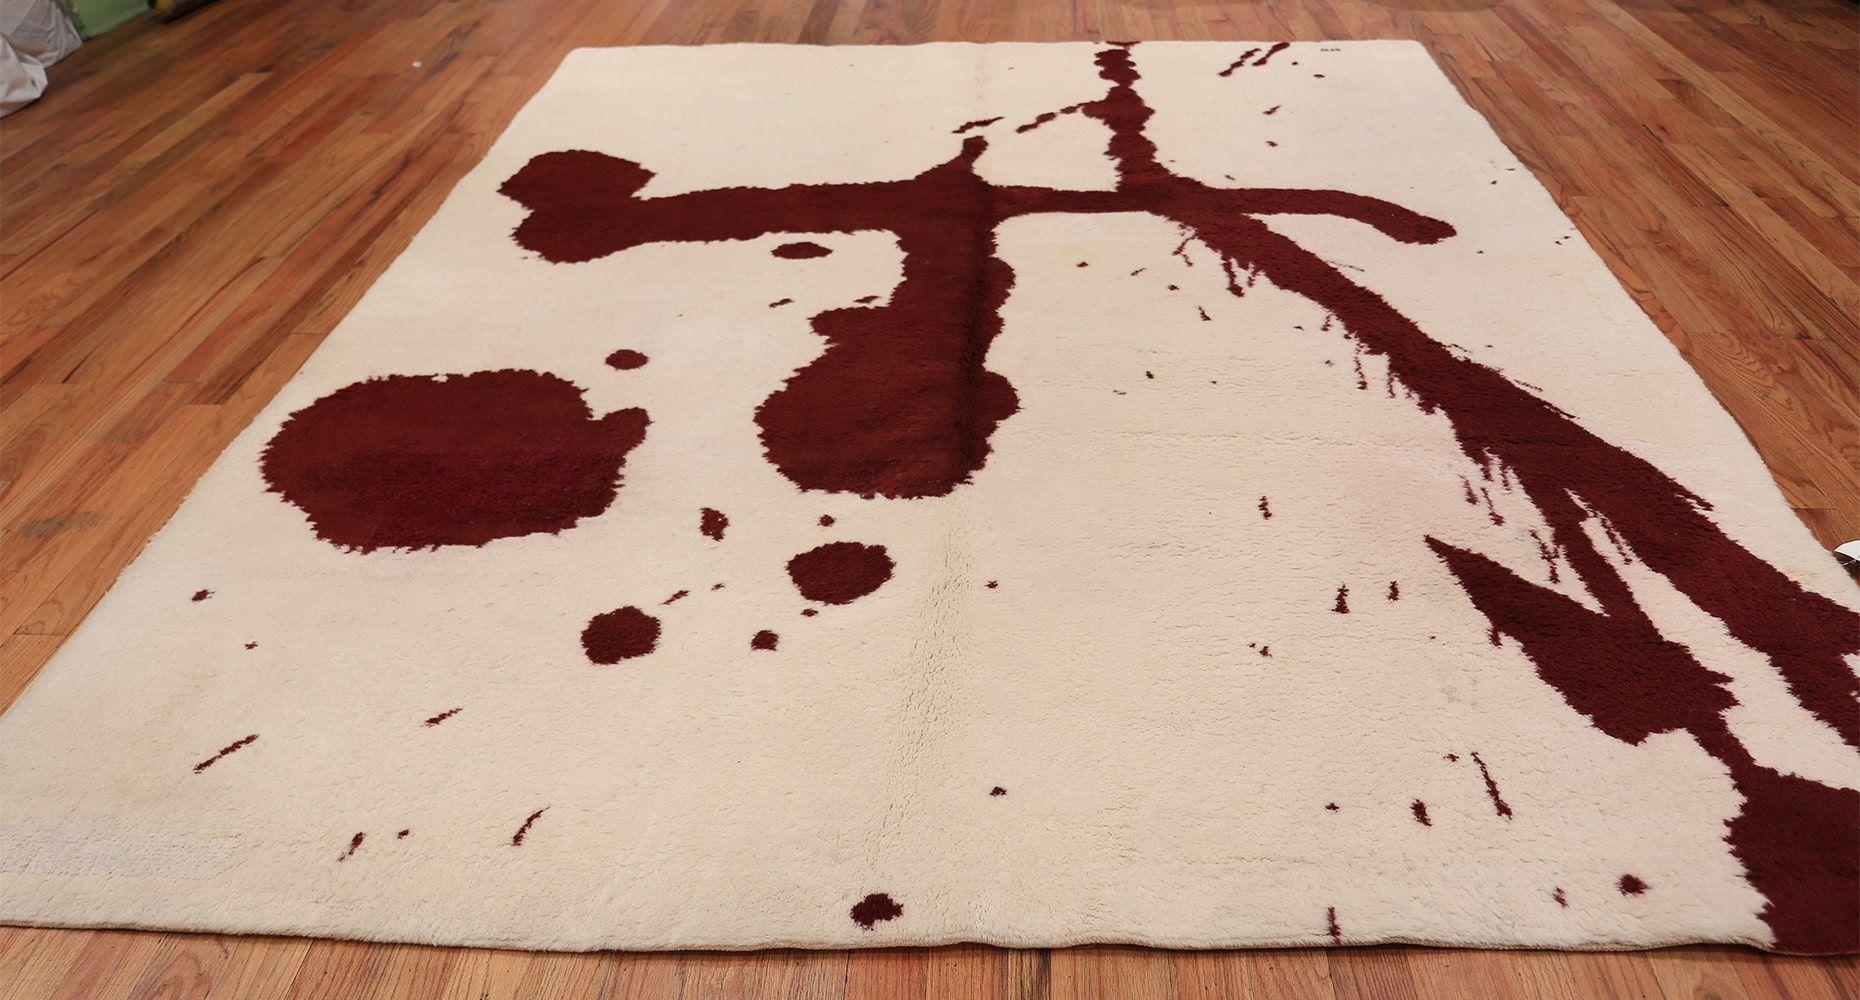 Beautiful Robert Motherwell vintage French rug, country of origin / rug type: French rug, date: circa mid-20th century. Size: 8 ft 2 in x 9 ft 9 in (2.49 m x 2.97 m)

The simplistic designs of the iconic artist Robert Motherwell are avant garde even